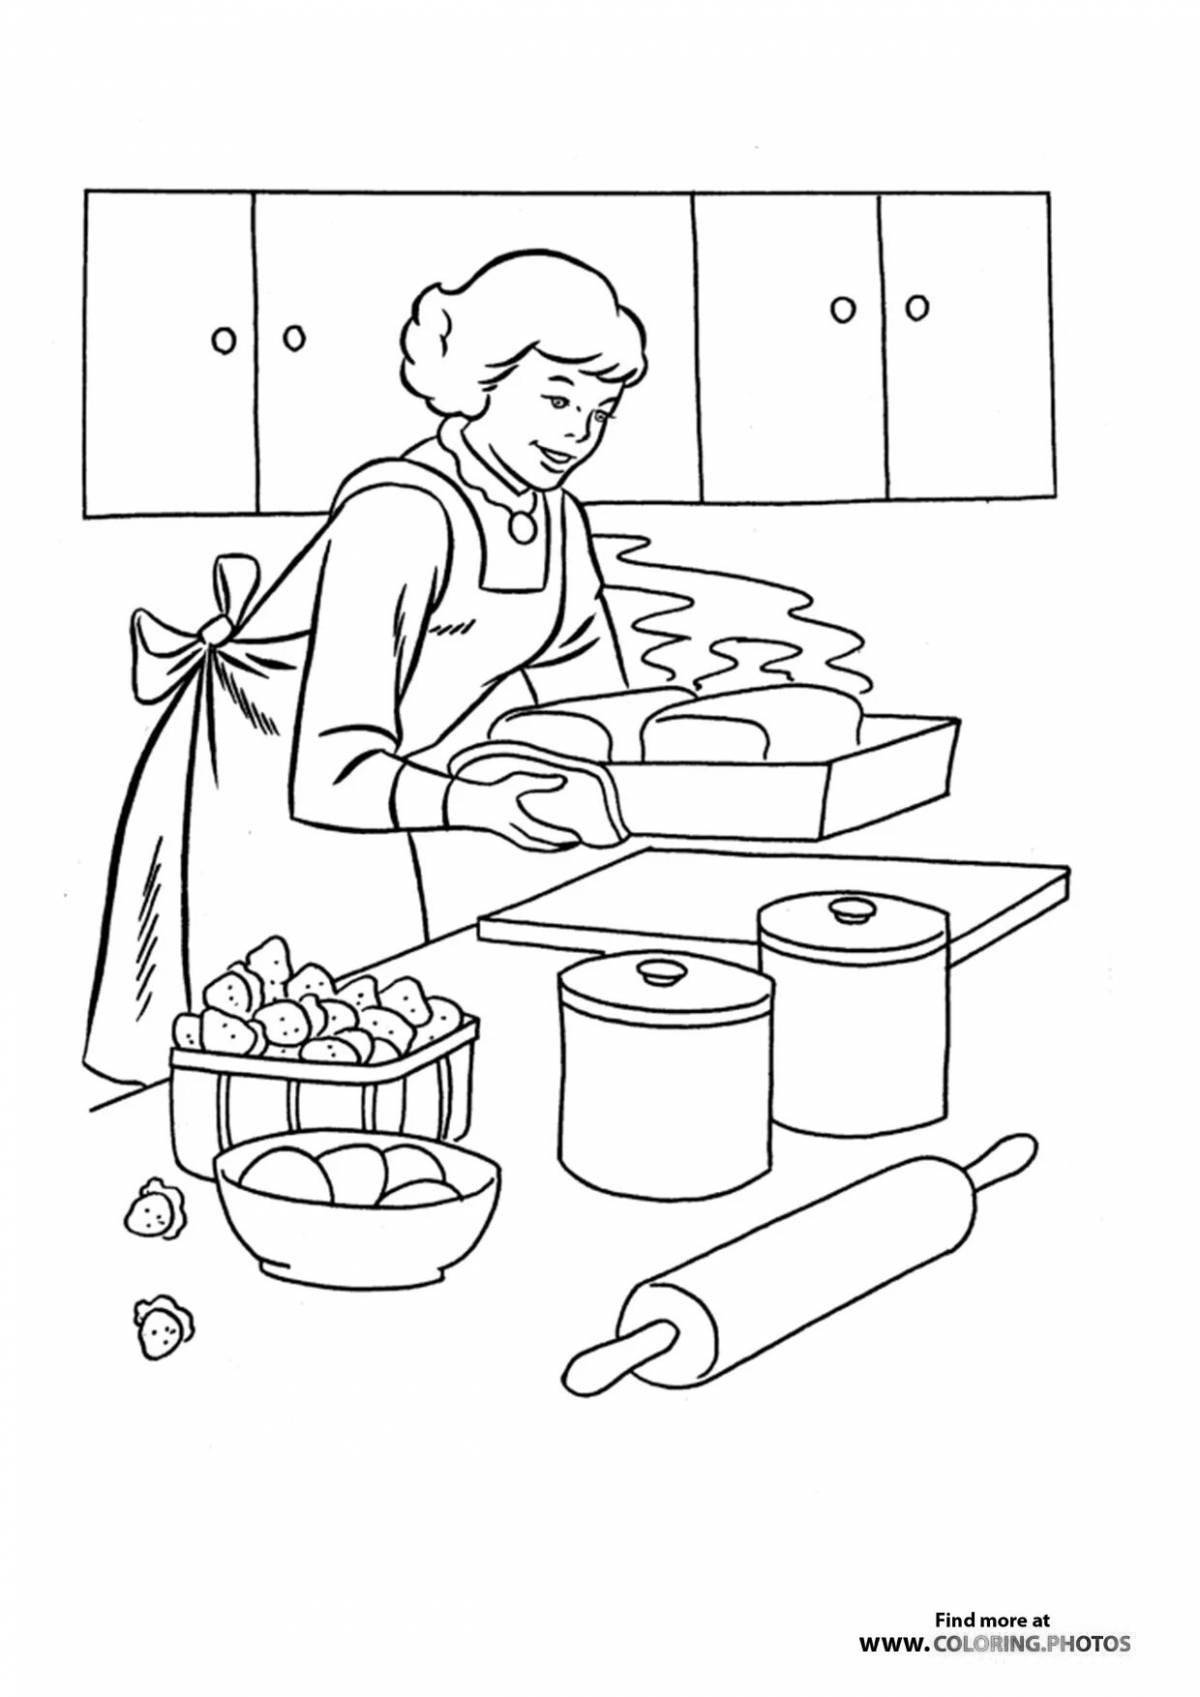 Coloring page festive pastry chef profession